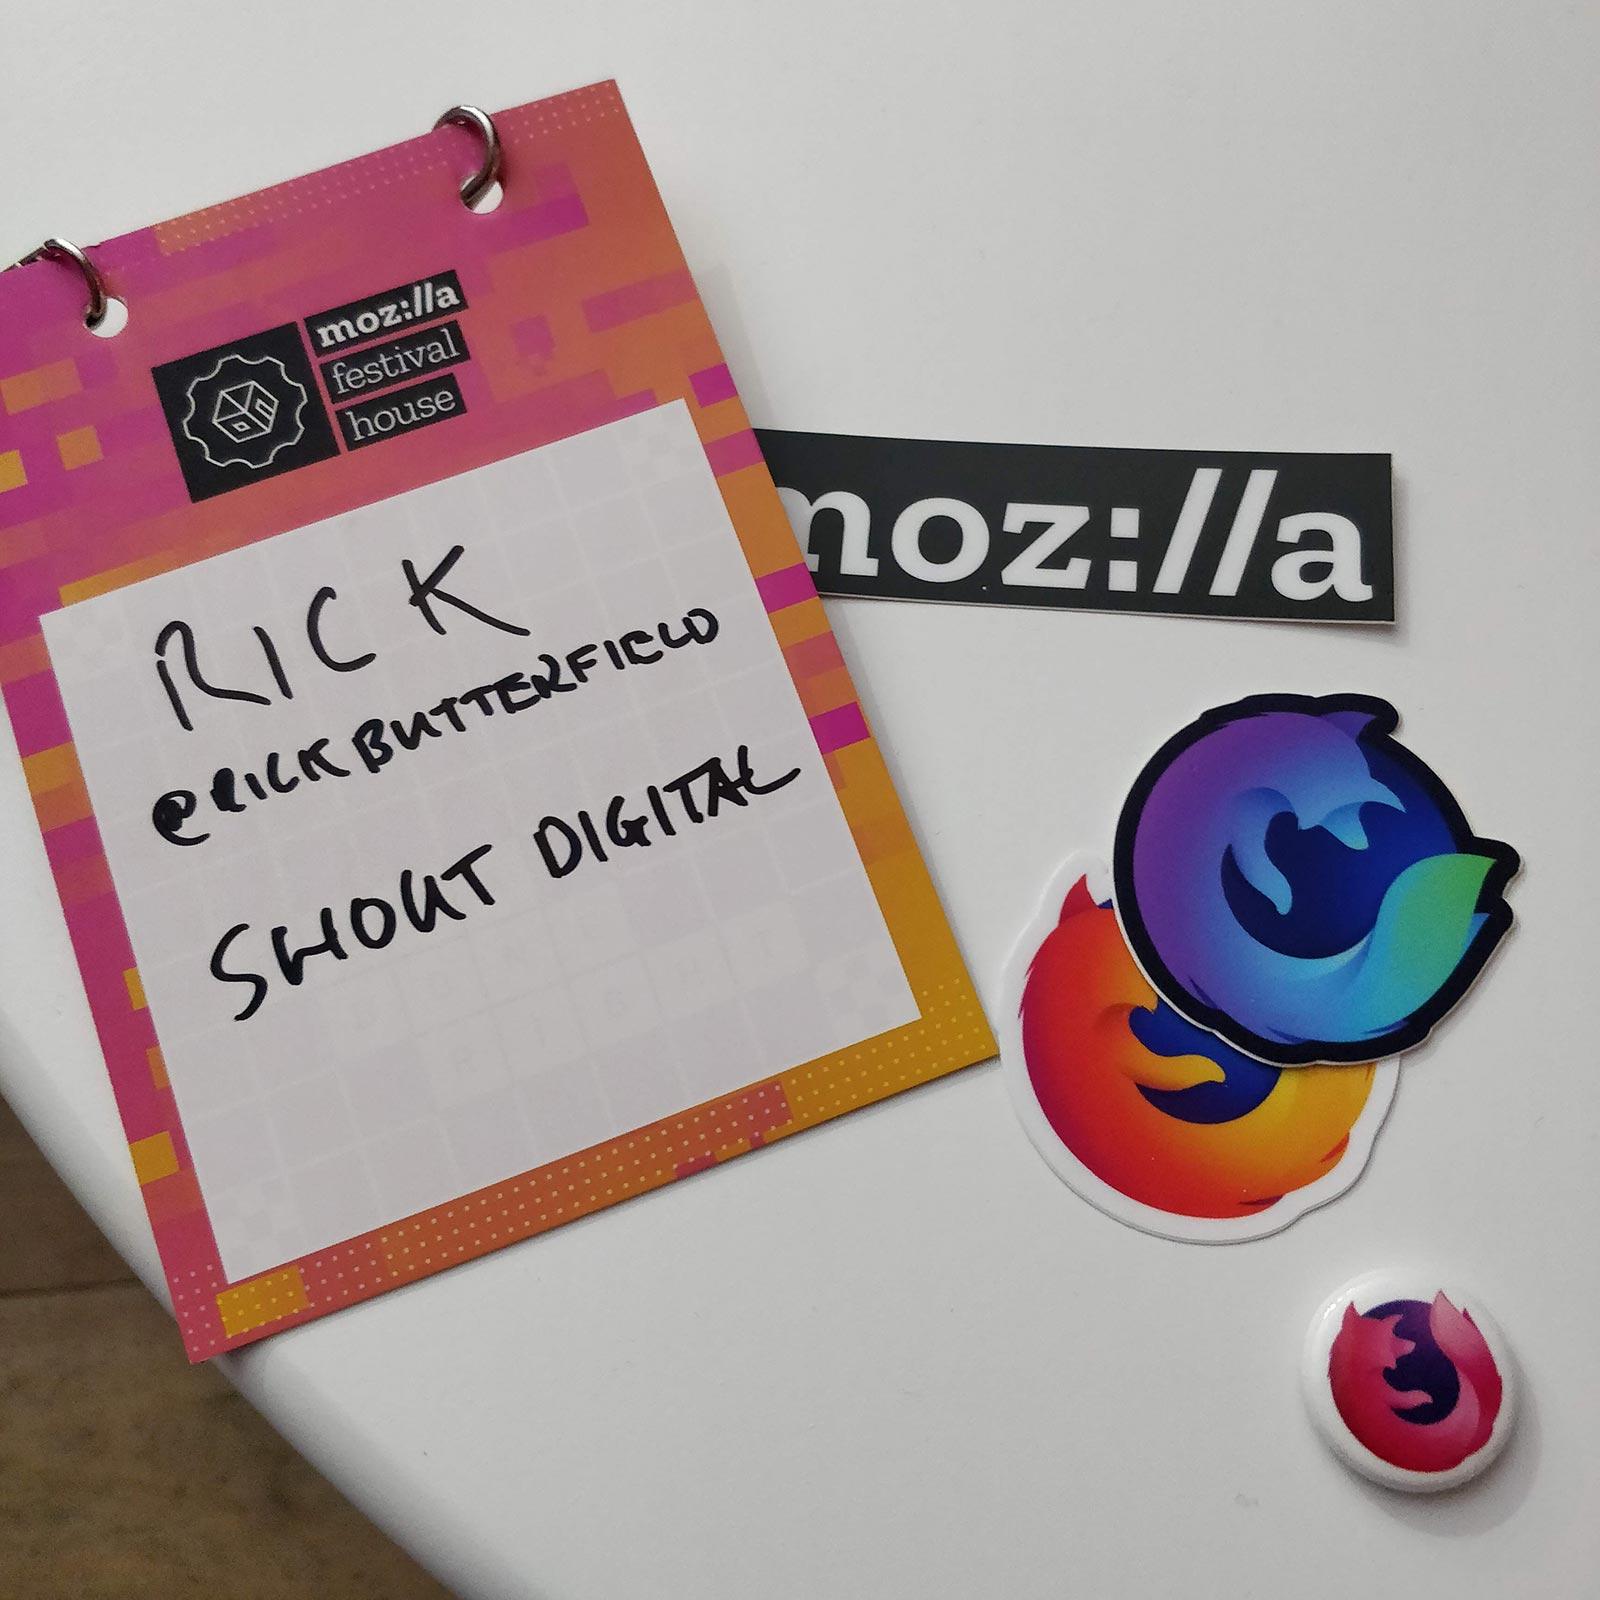 My conference lanyard and a number of Mozilla stickers